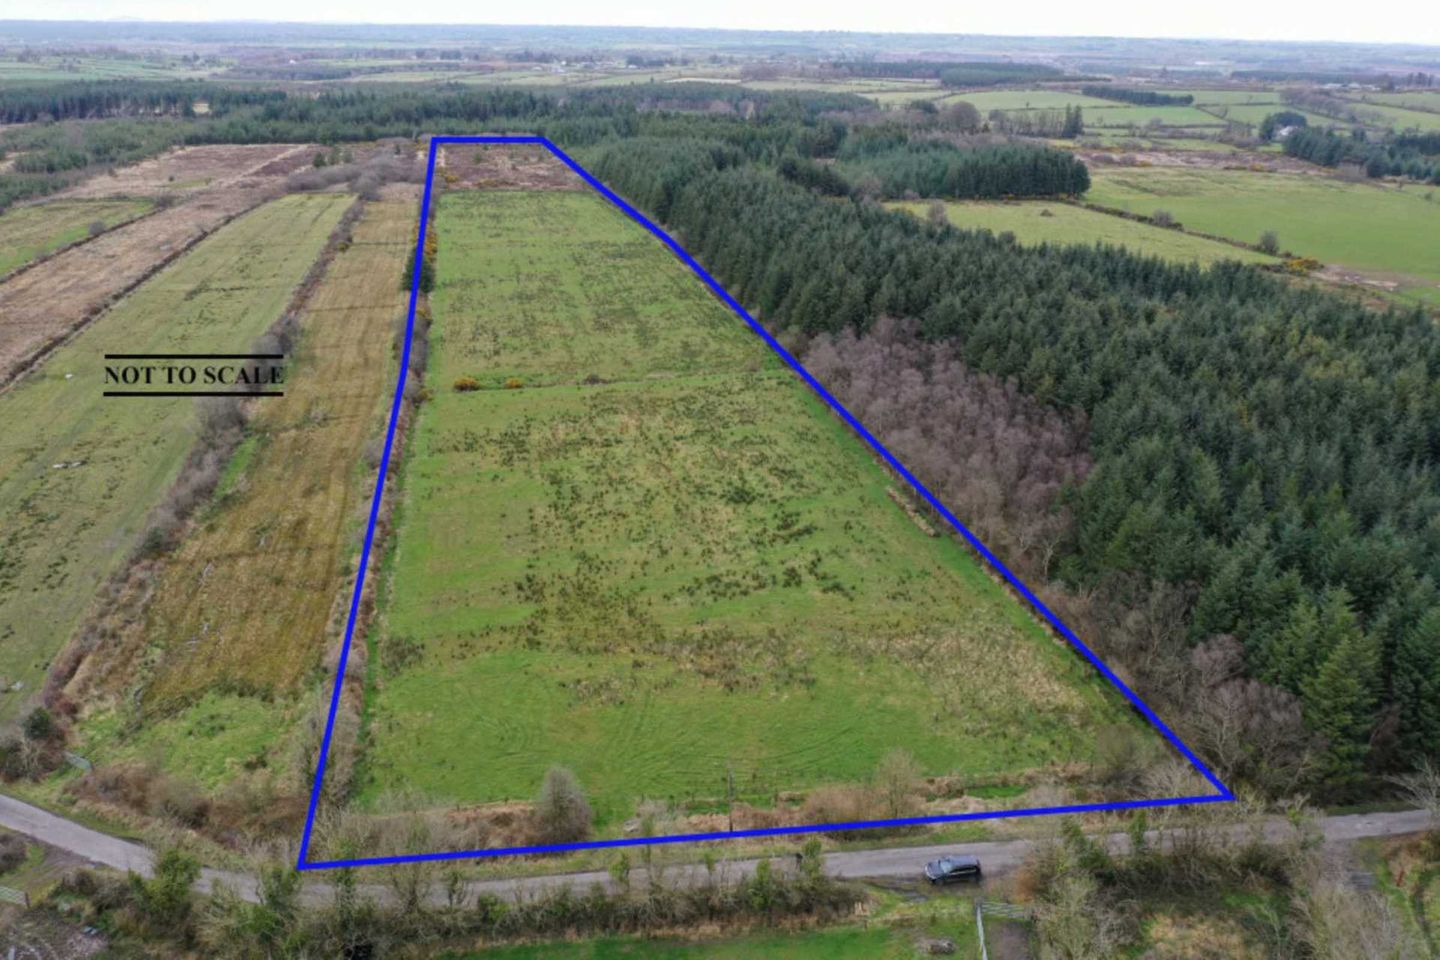 c. 10.28 Acres at Aghalateeve, Creggs, Co. Galway